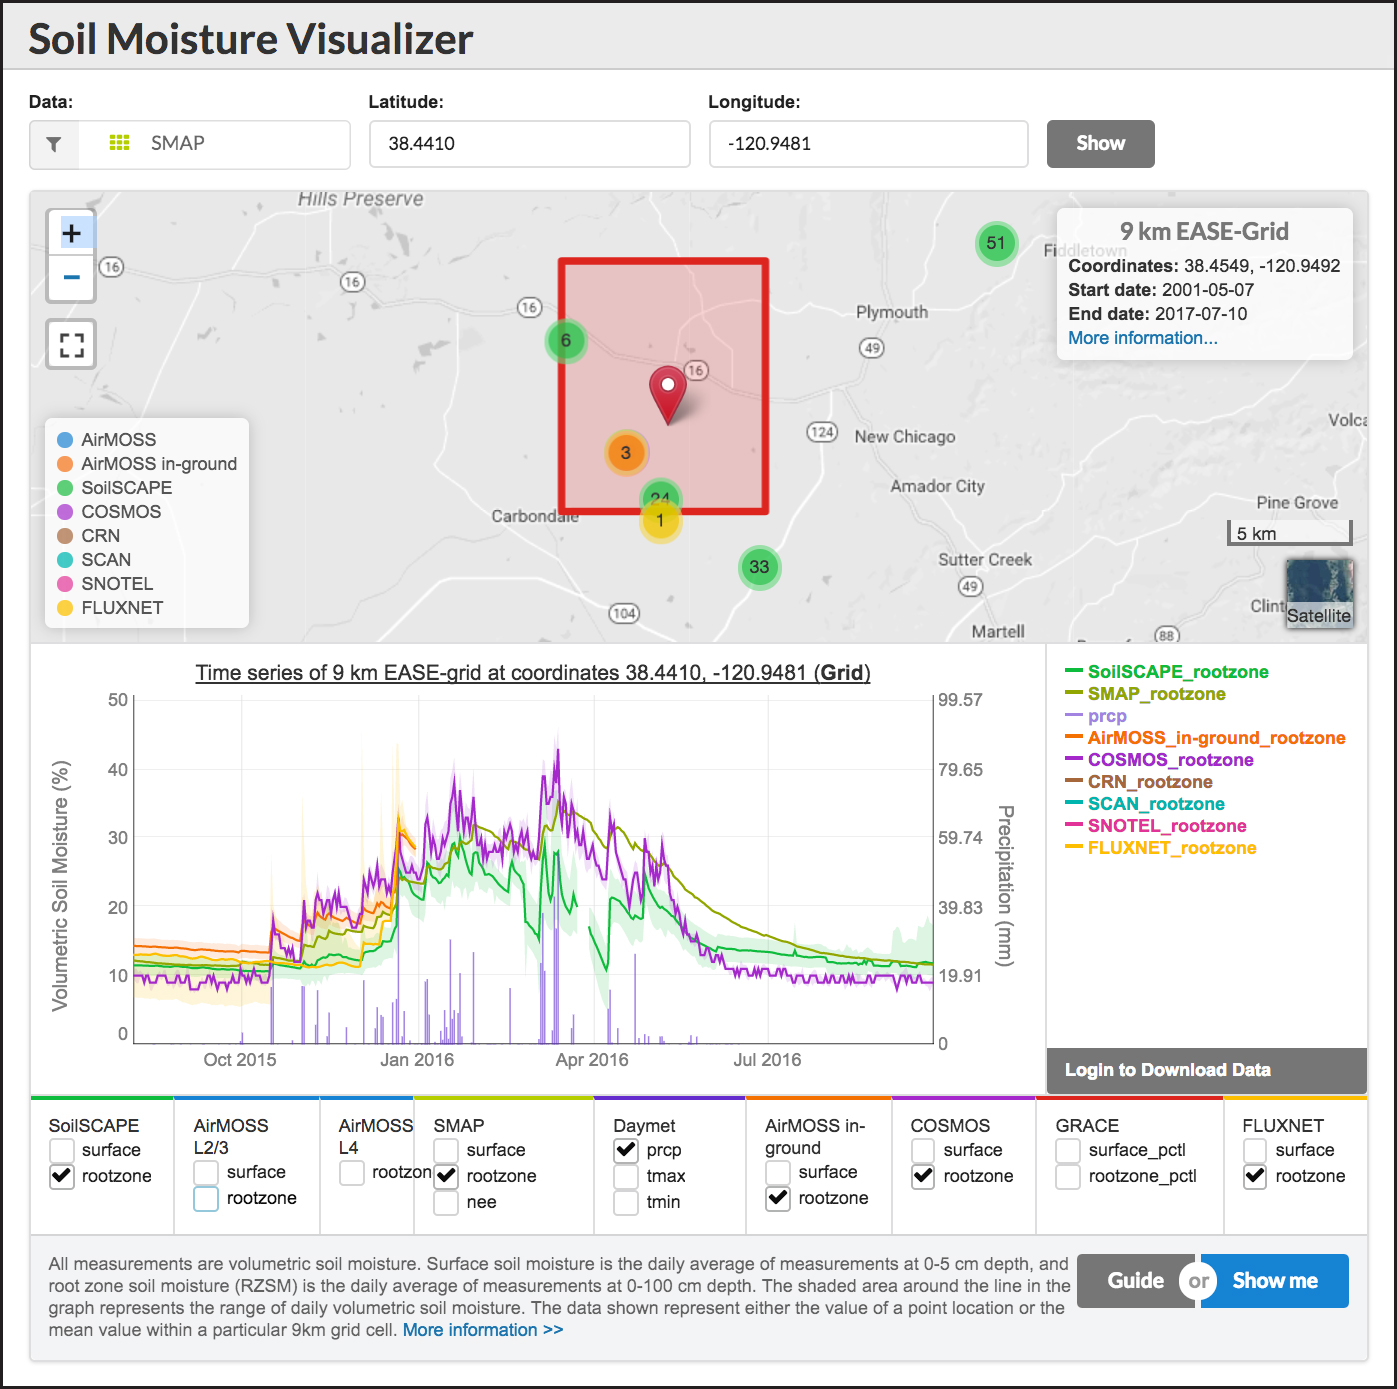 The Soil Moisture Visualizer allows users to compare soil moisture measurements from multiple sources.